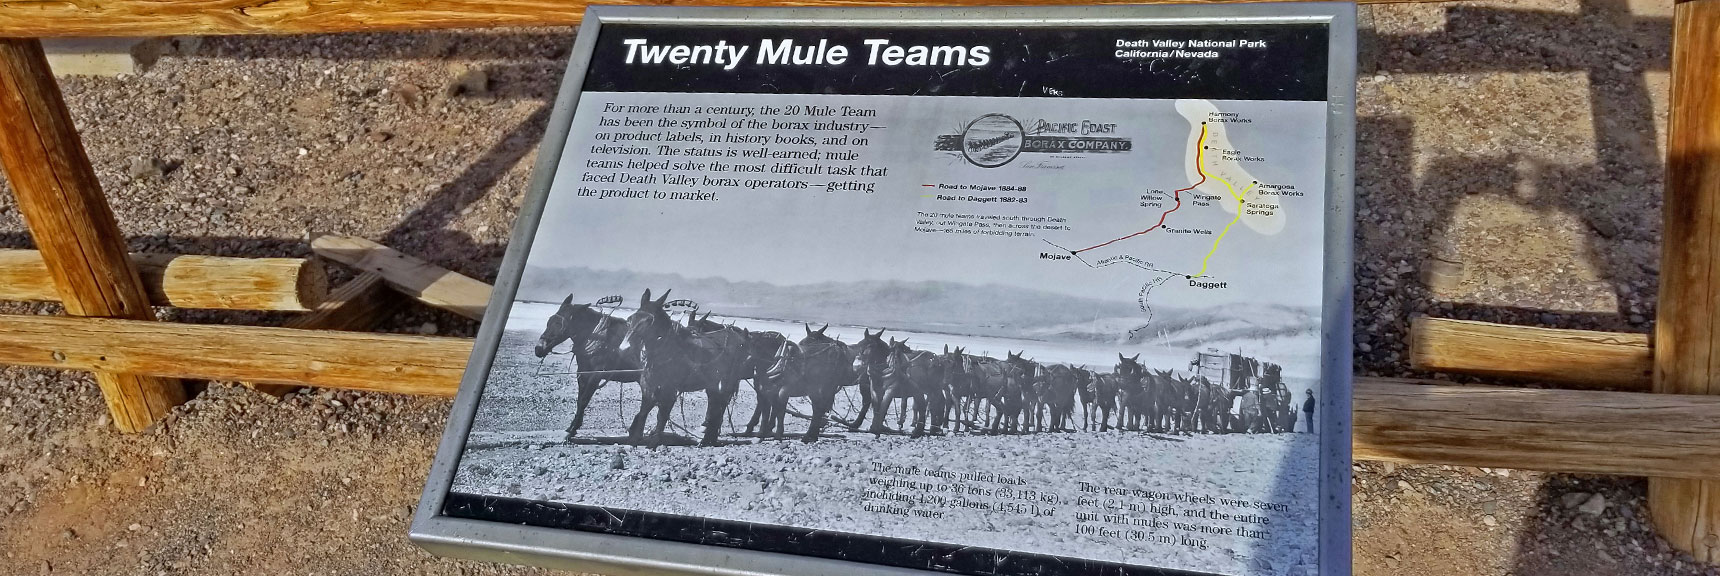 Historic Photo of 20 Mule Team with Map of Route to Mojave CA. | Twenty Mule Team Canyon | Death Valley National Park, California